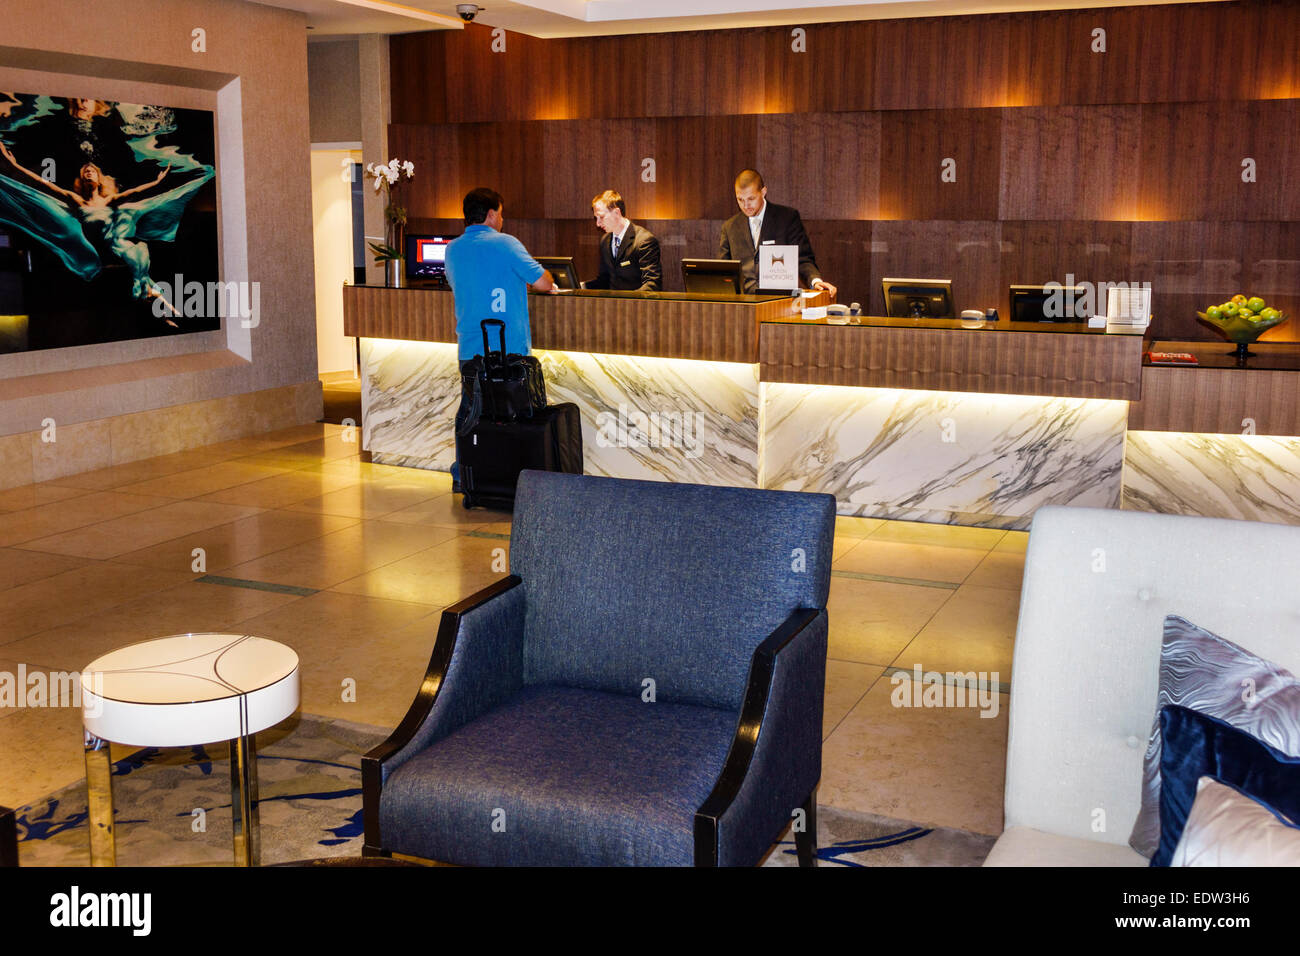 Chicago Illinois,North River,North Rush Street,Conrad Hilton,hotel,lobby,front desk check in reception reservation reservations register,reservations, Stock Photo